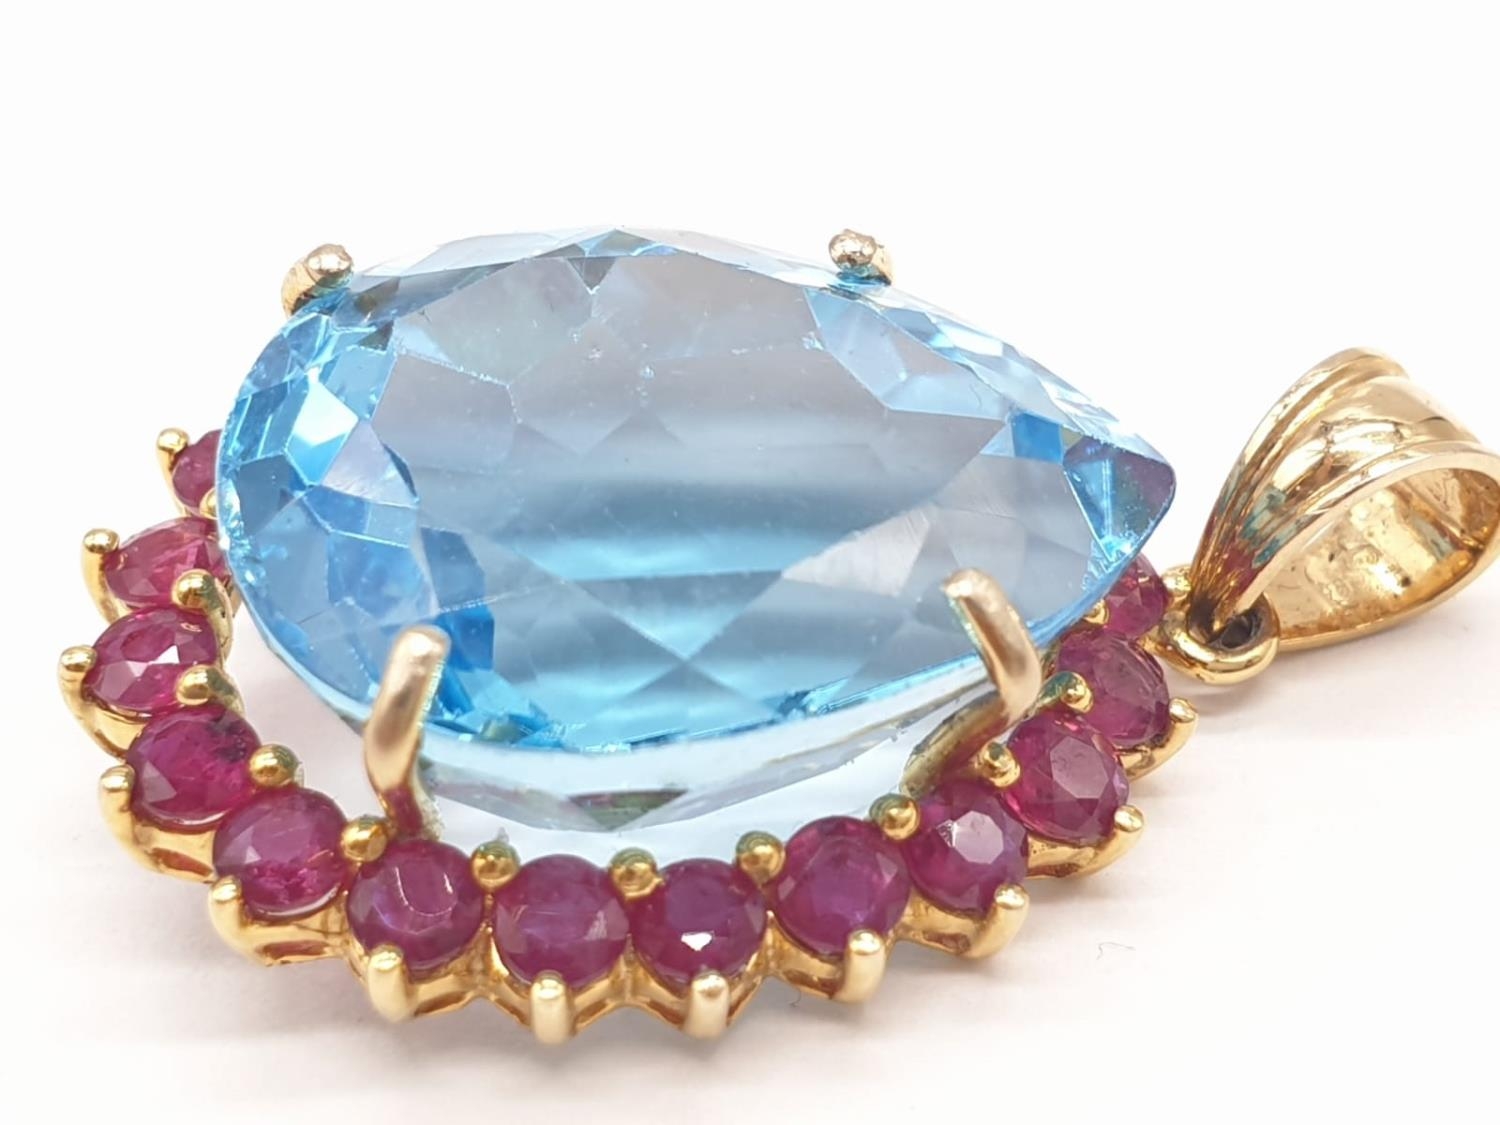 Topaz and ruby in 14ct gold pendant, weight 8g - Image 2 of 5